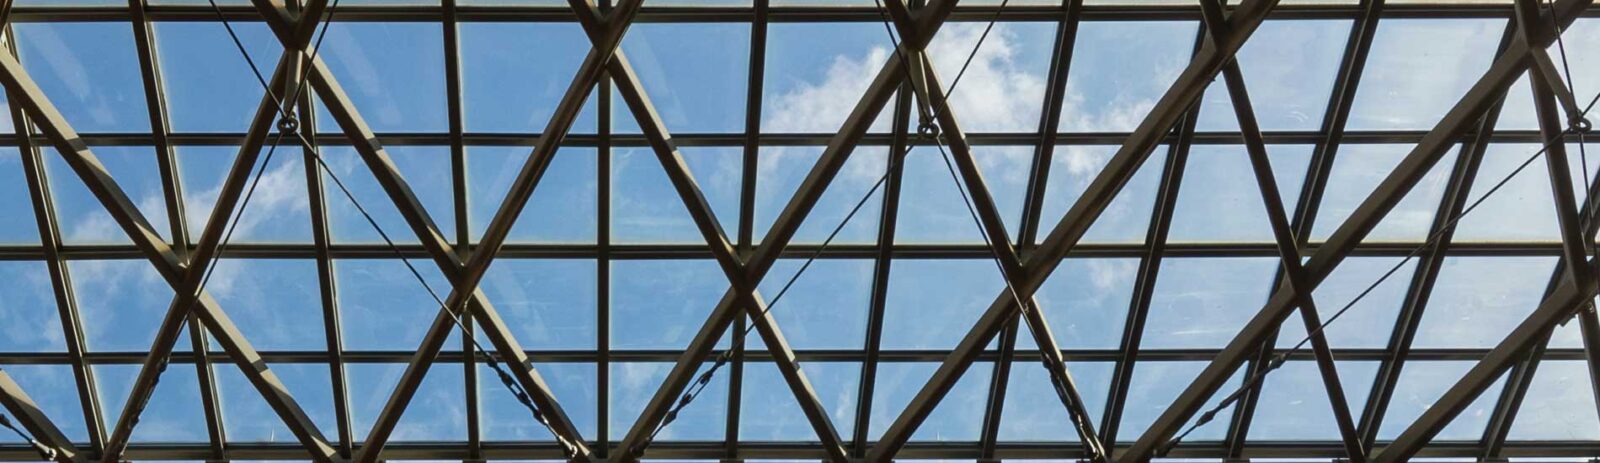 Blue sky and small white clouds visible through the glass ceiling of the Sage Hall atrium.